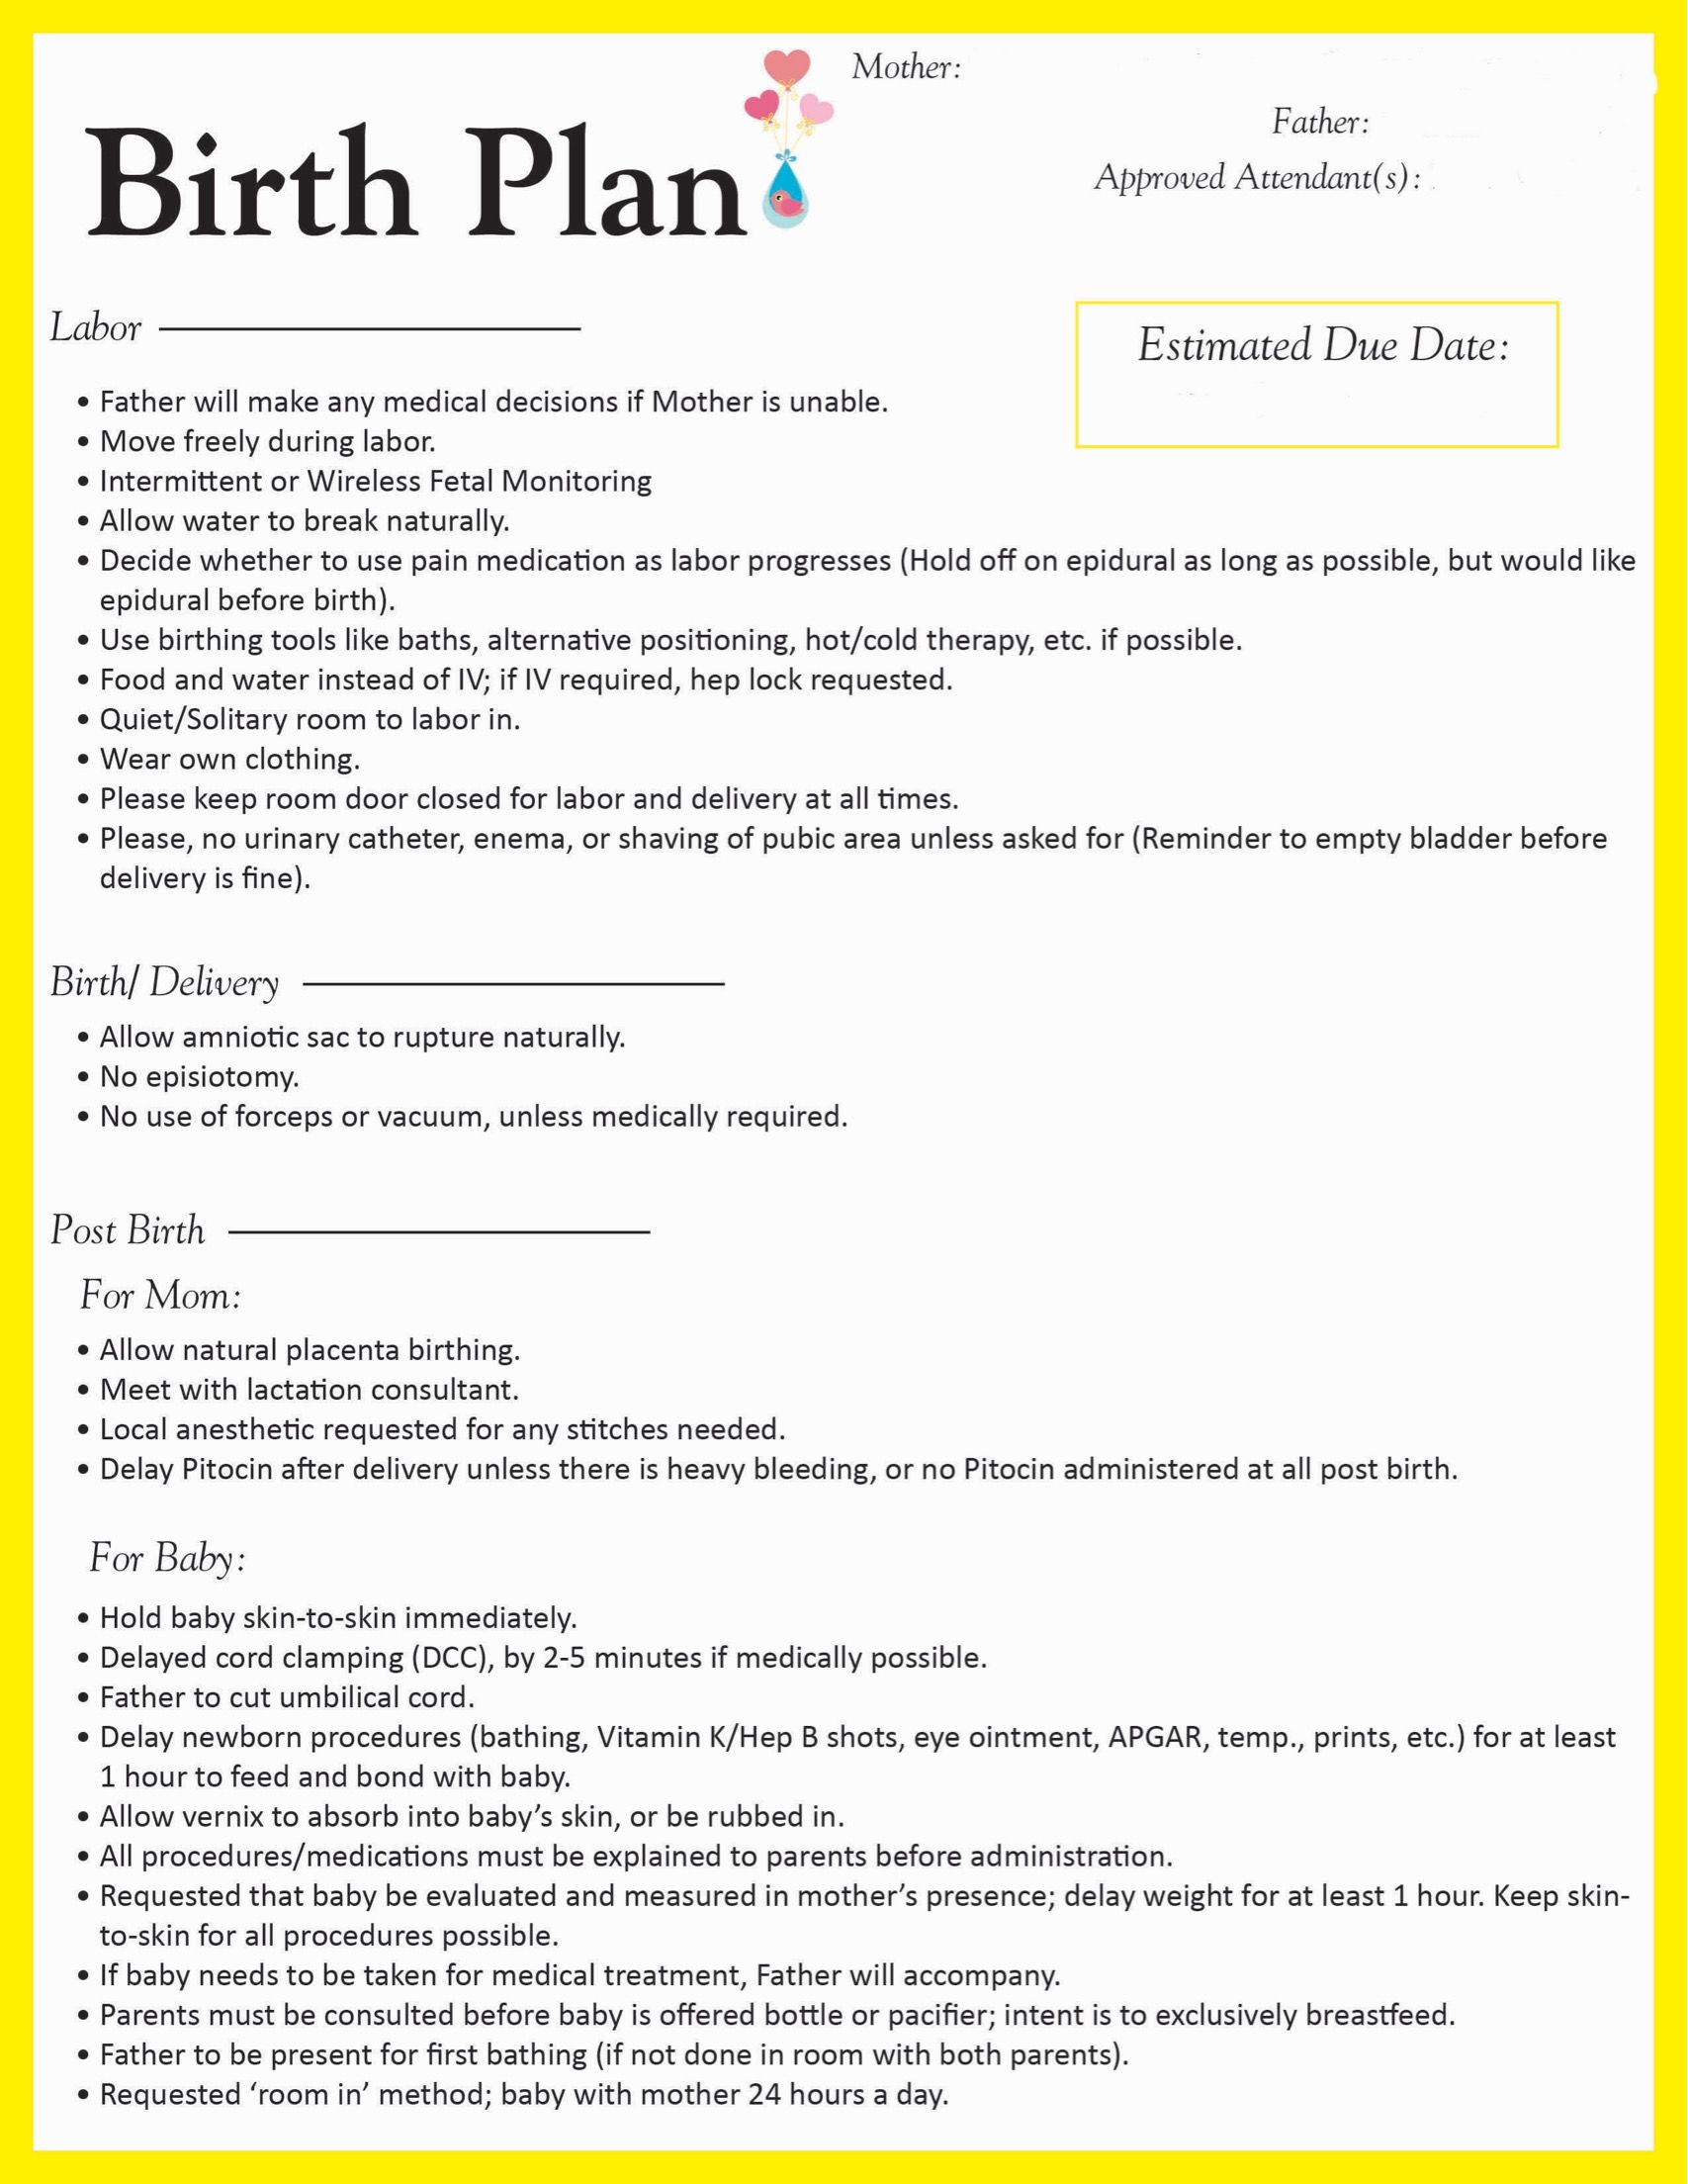 Birth Plan Template   20+ Download Free Documents in PDF, Word 